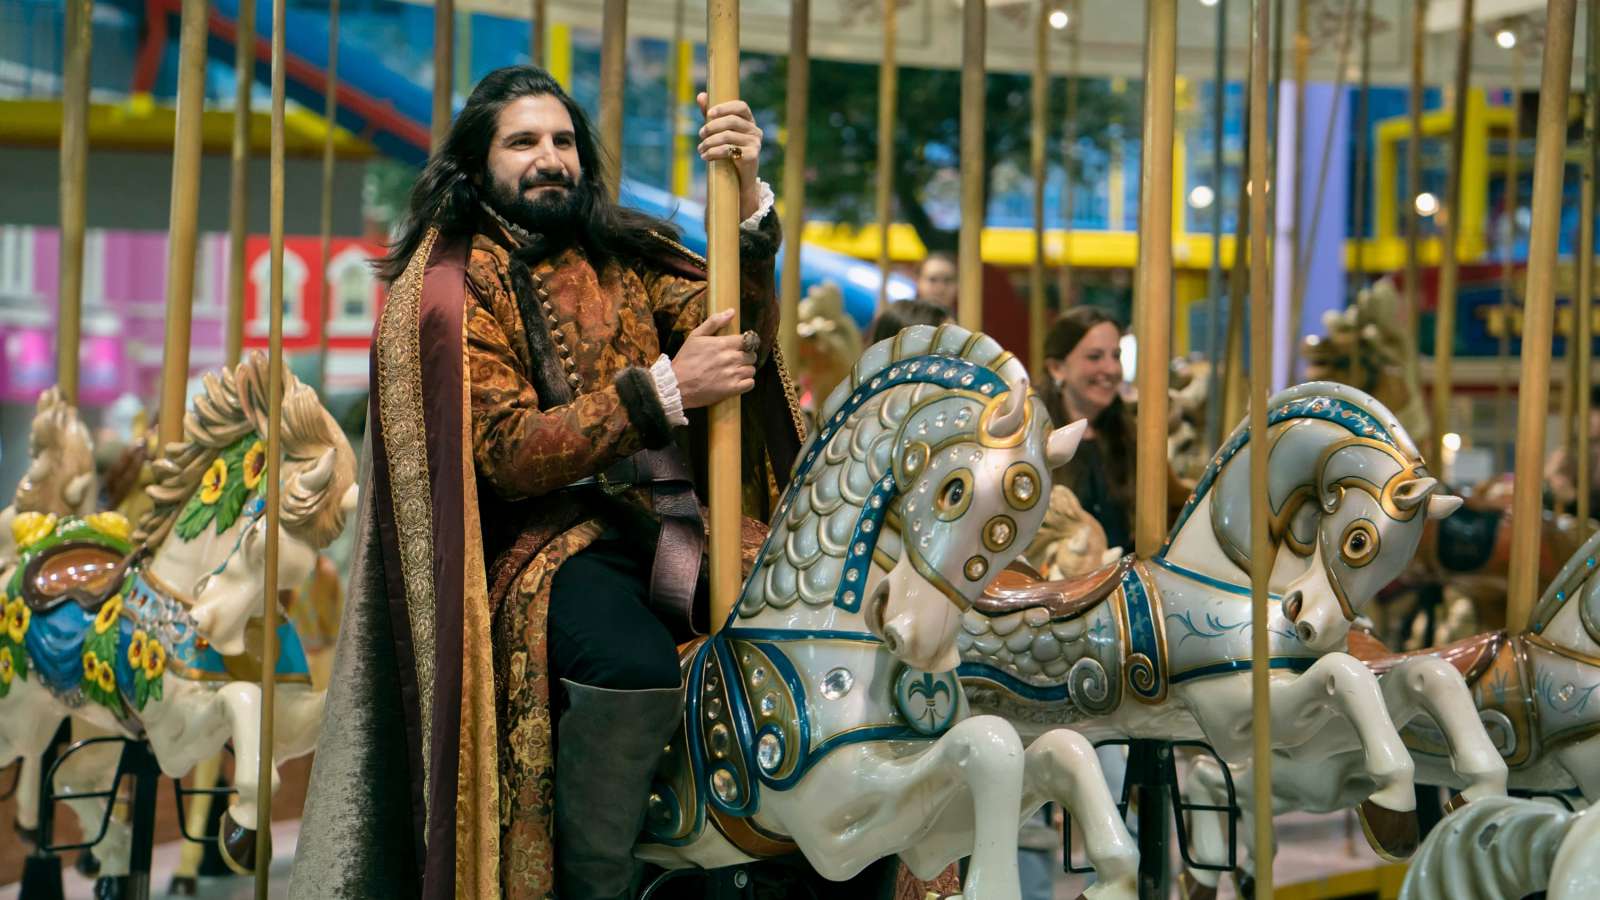 What We Do in the Shadows : The Mall